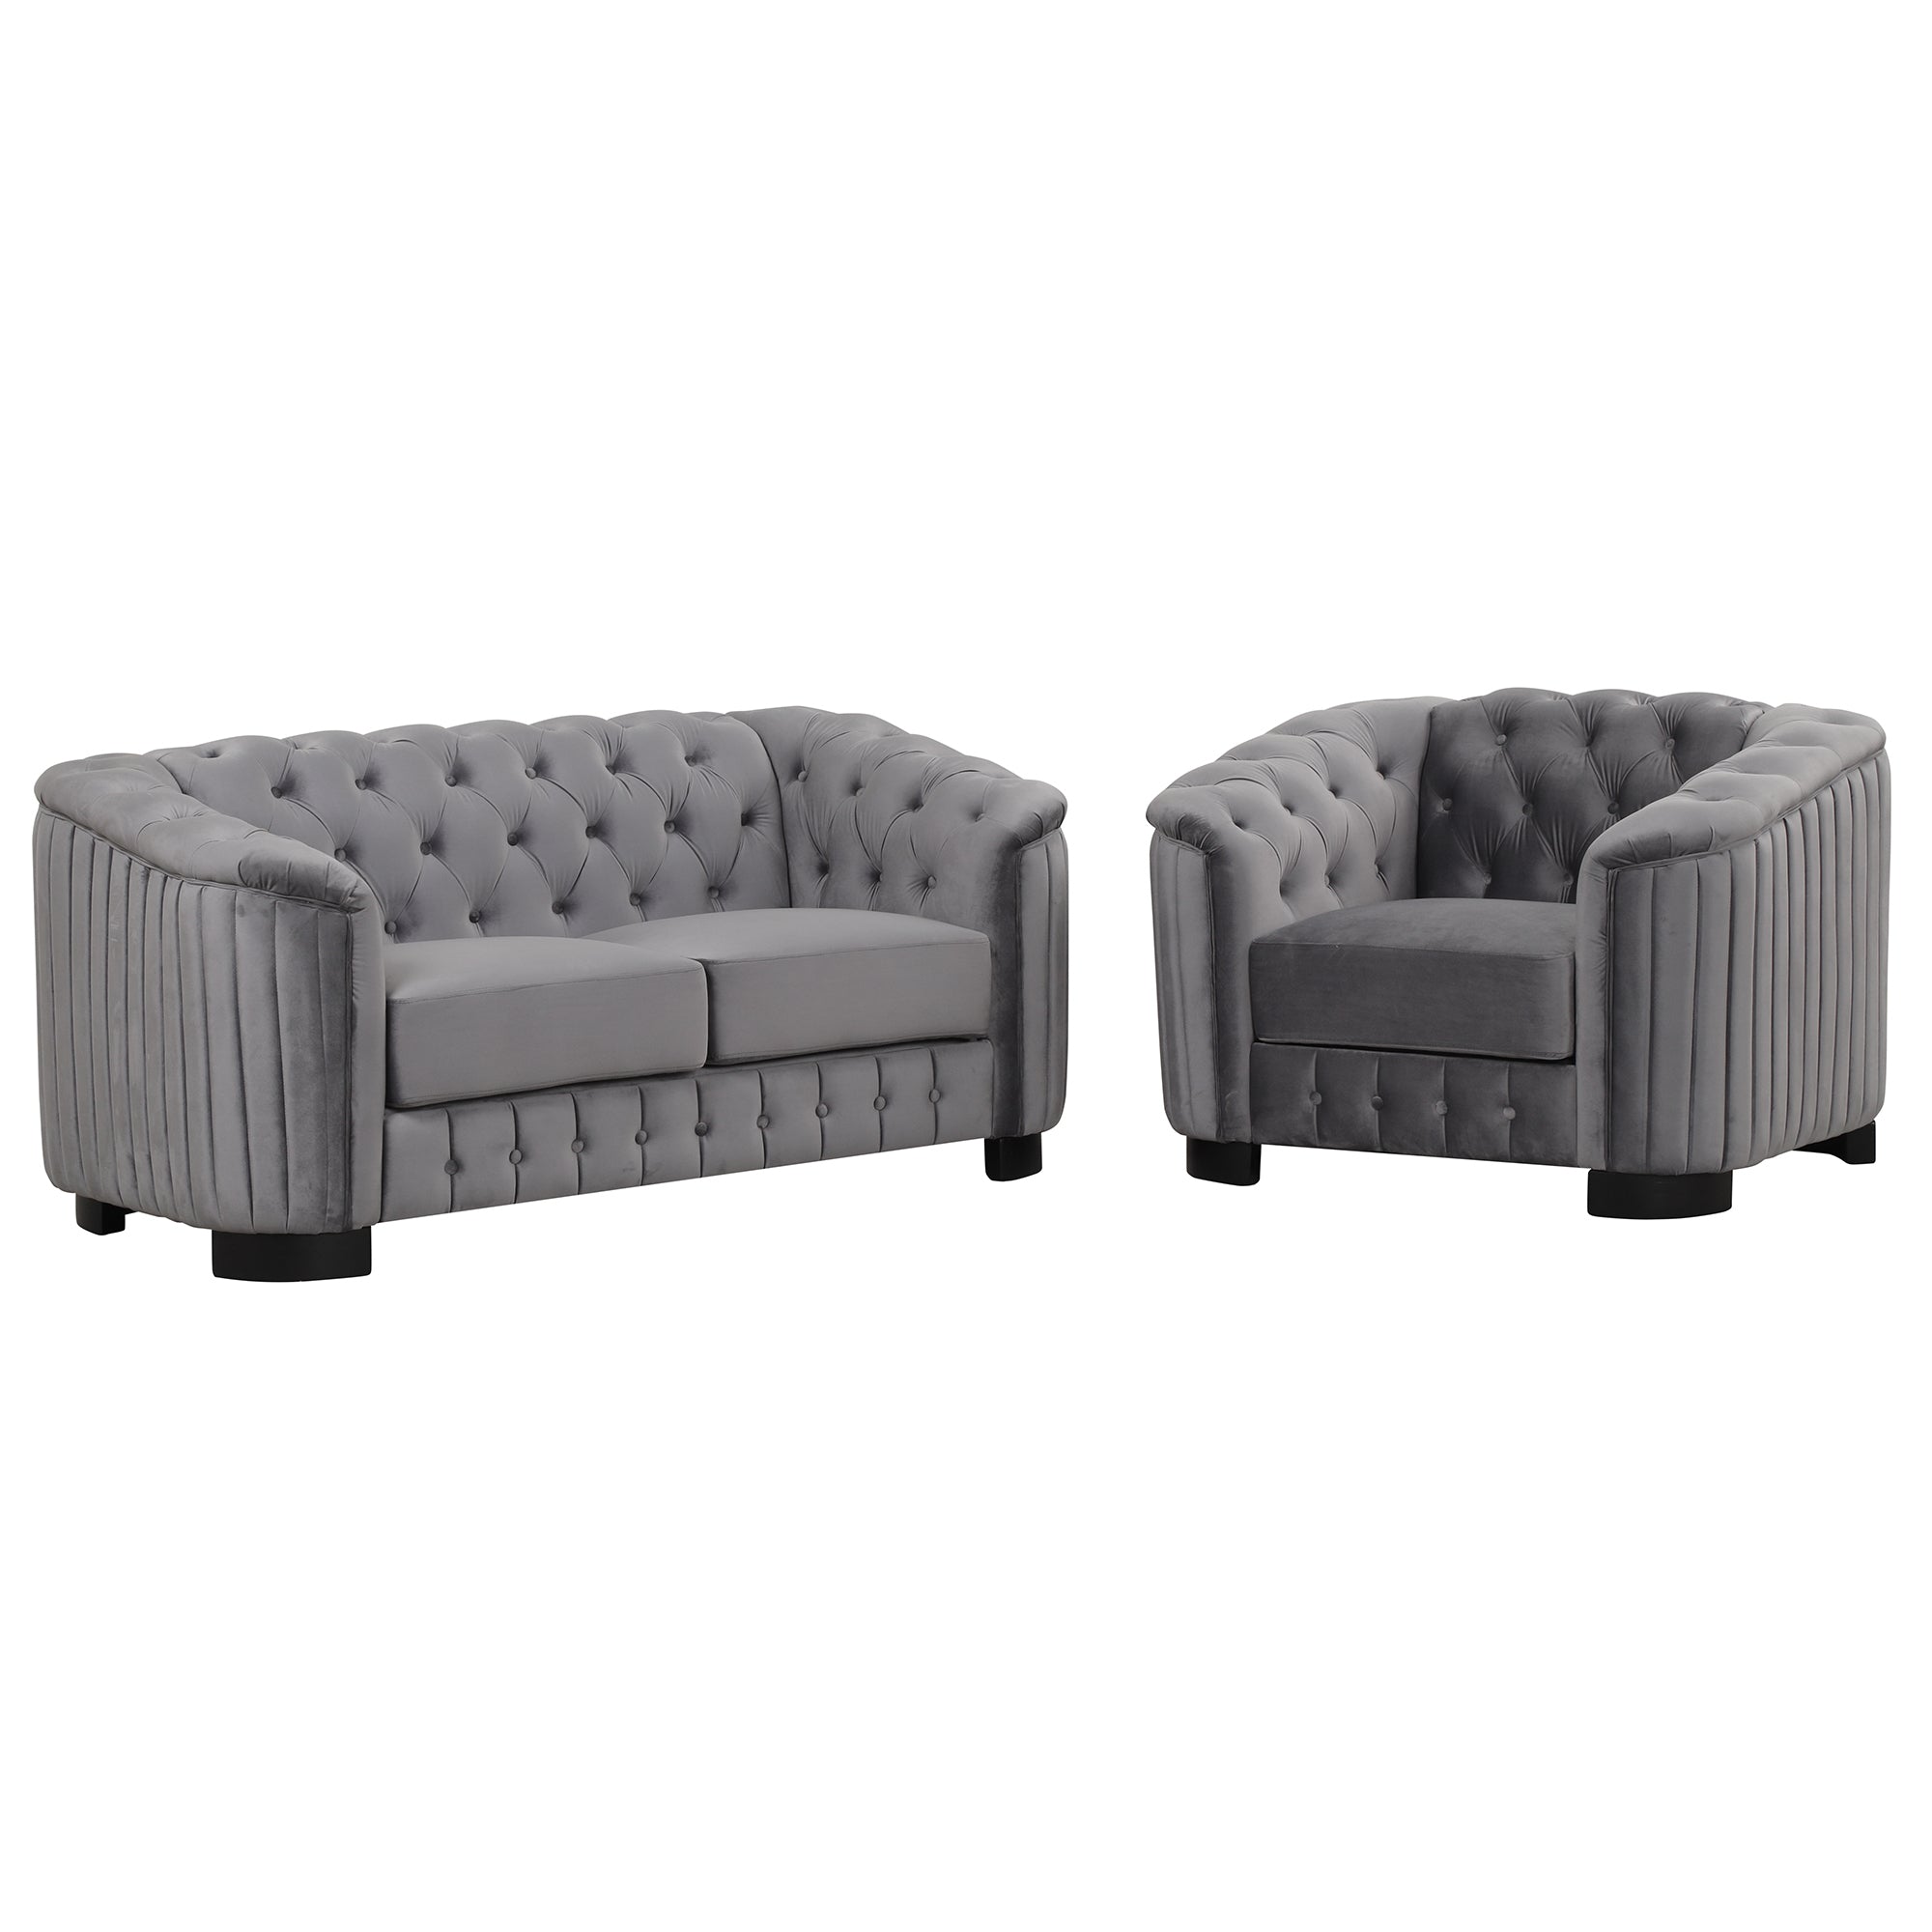 2 Piece Velvet Upholstered Sofa Sets Loveseat and 3 Seat Couch Set